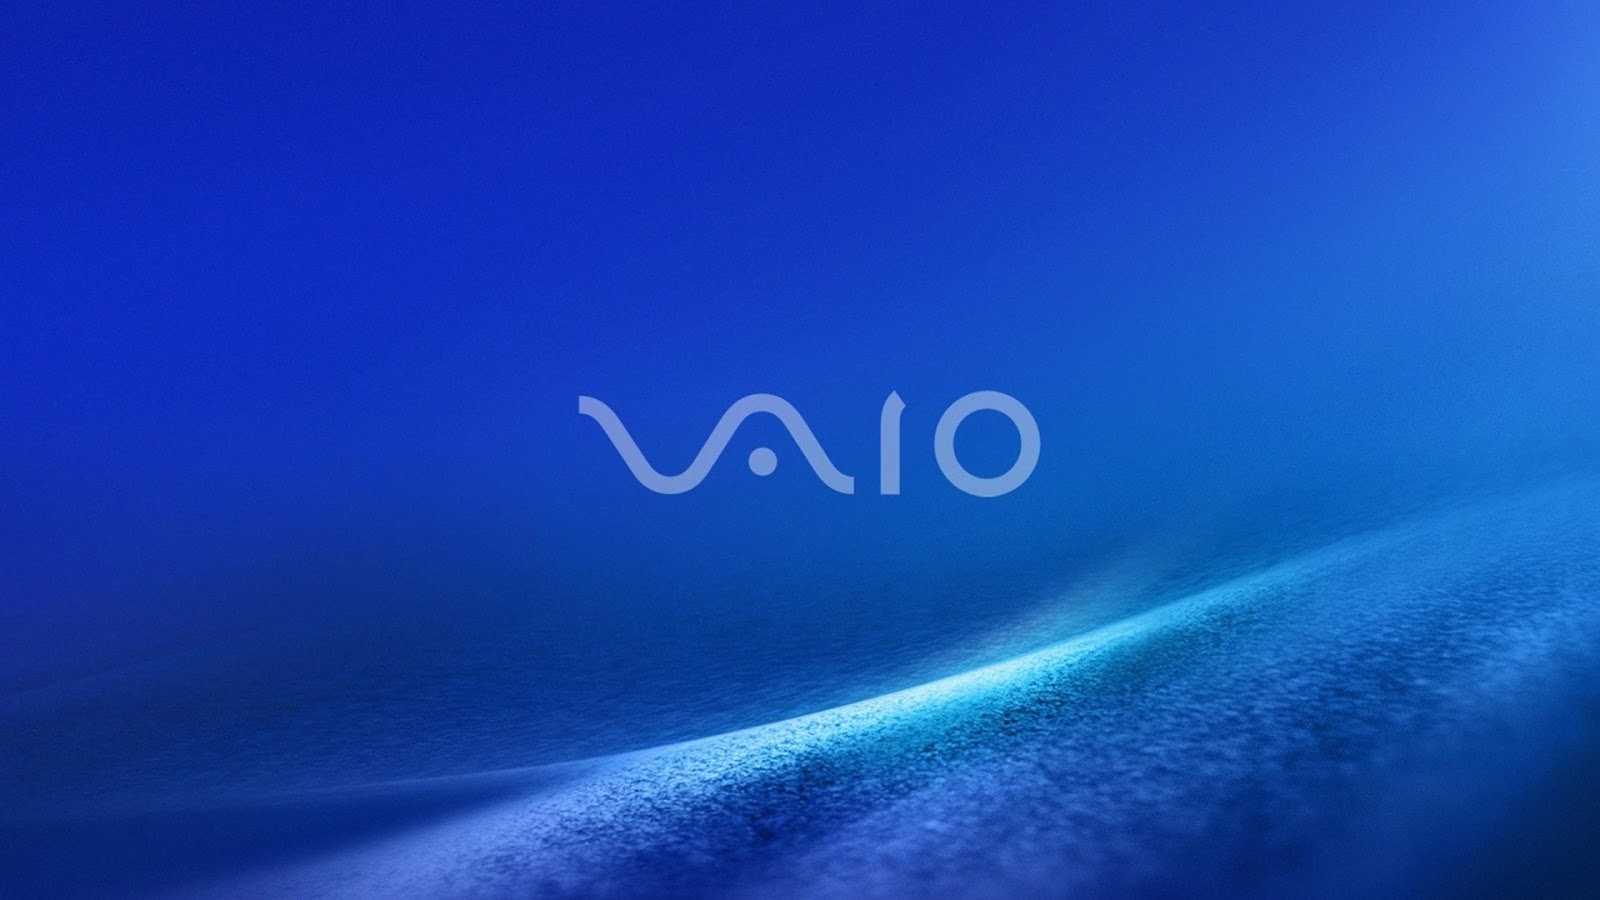 Sony Vaio HD wallpapers